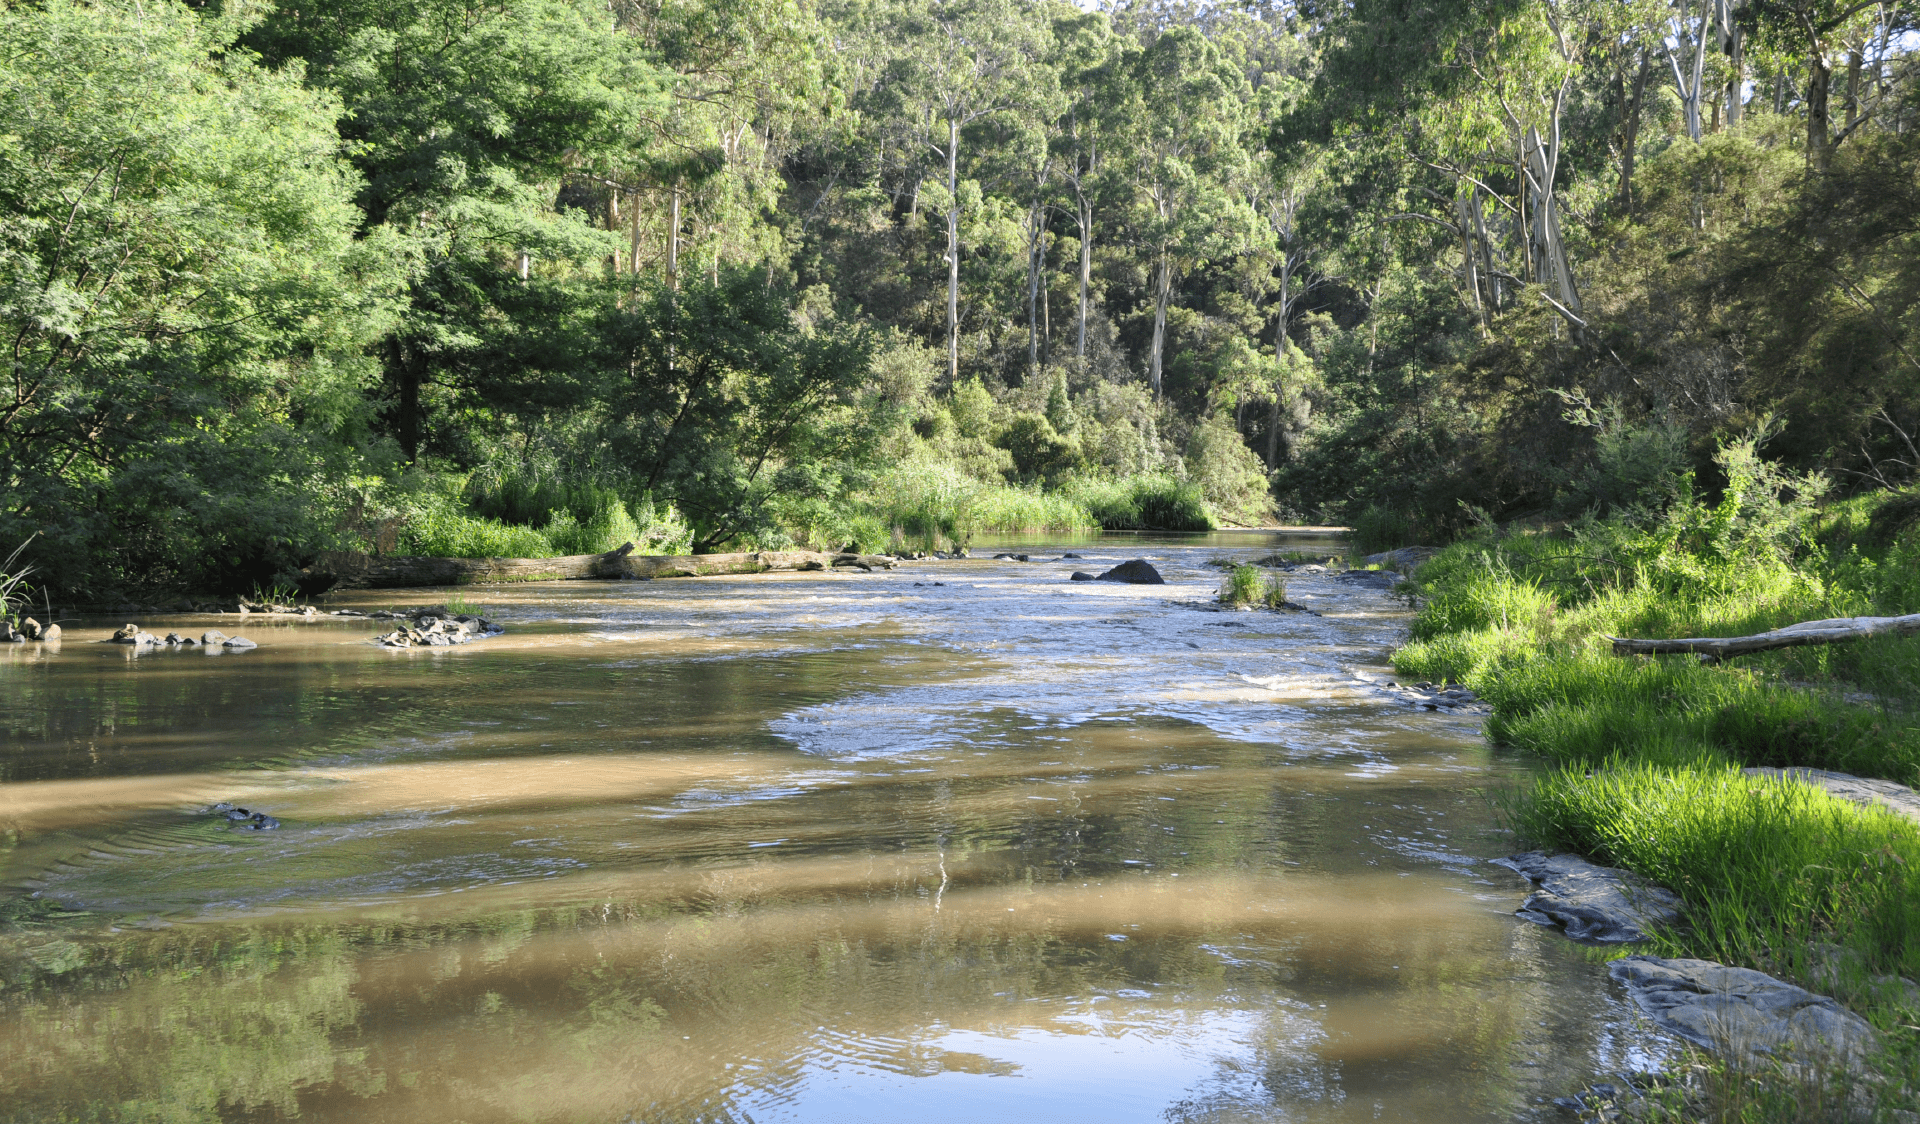 The Yarra River in Warrandyte State Park